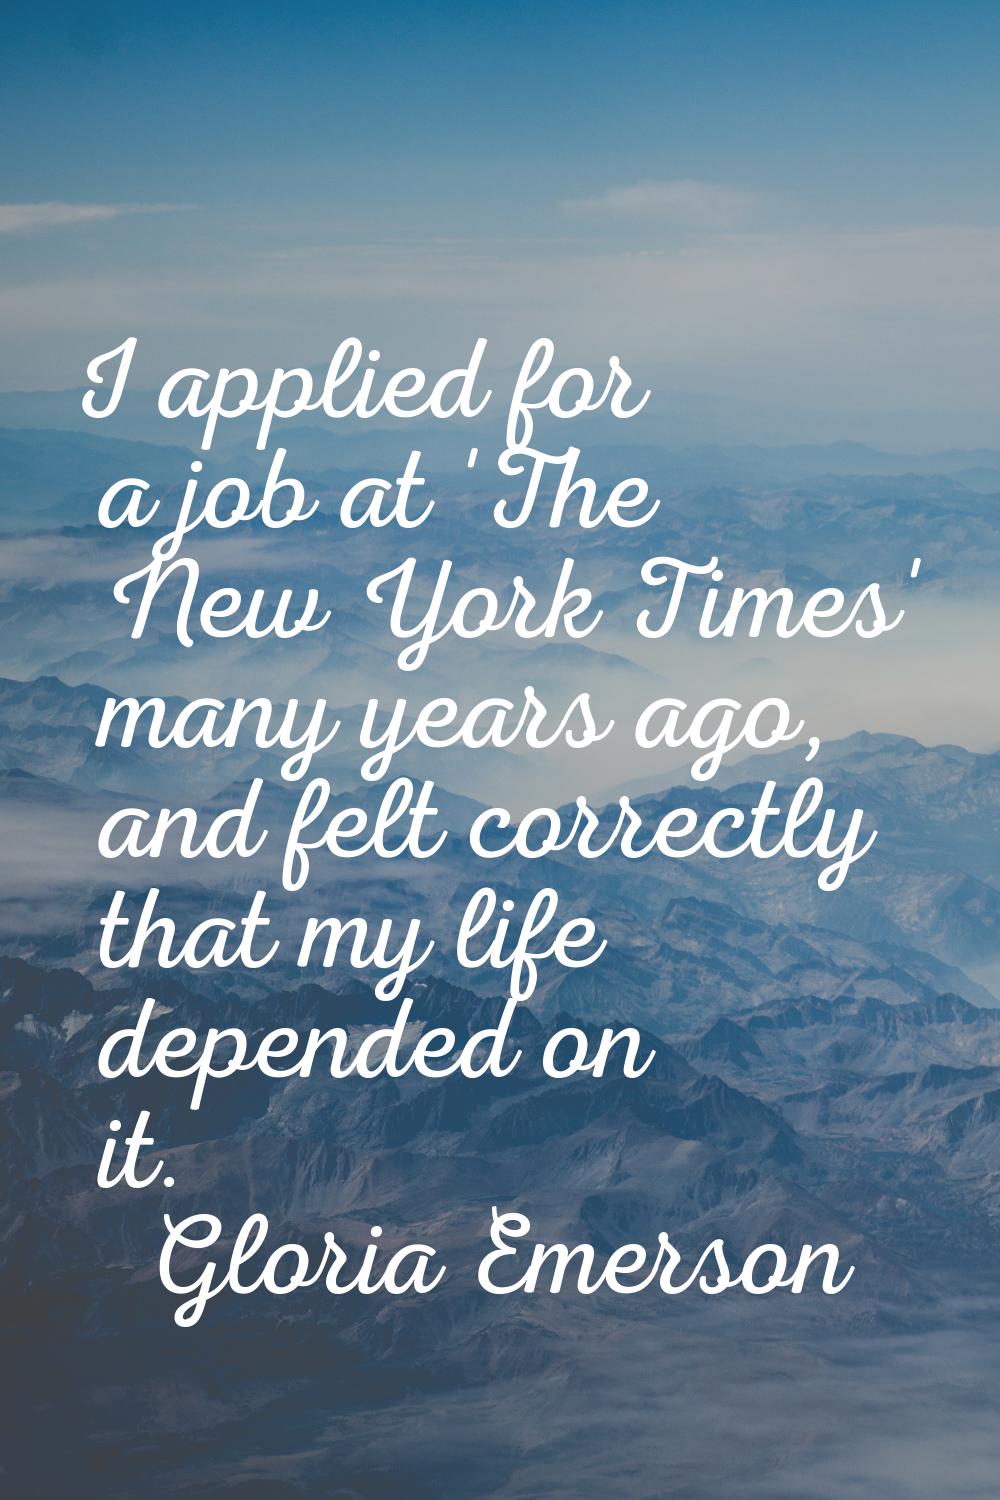 I applied for a job at 'The New York Times' many years ago, and felt correctly that my life depende